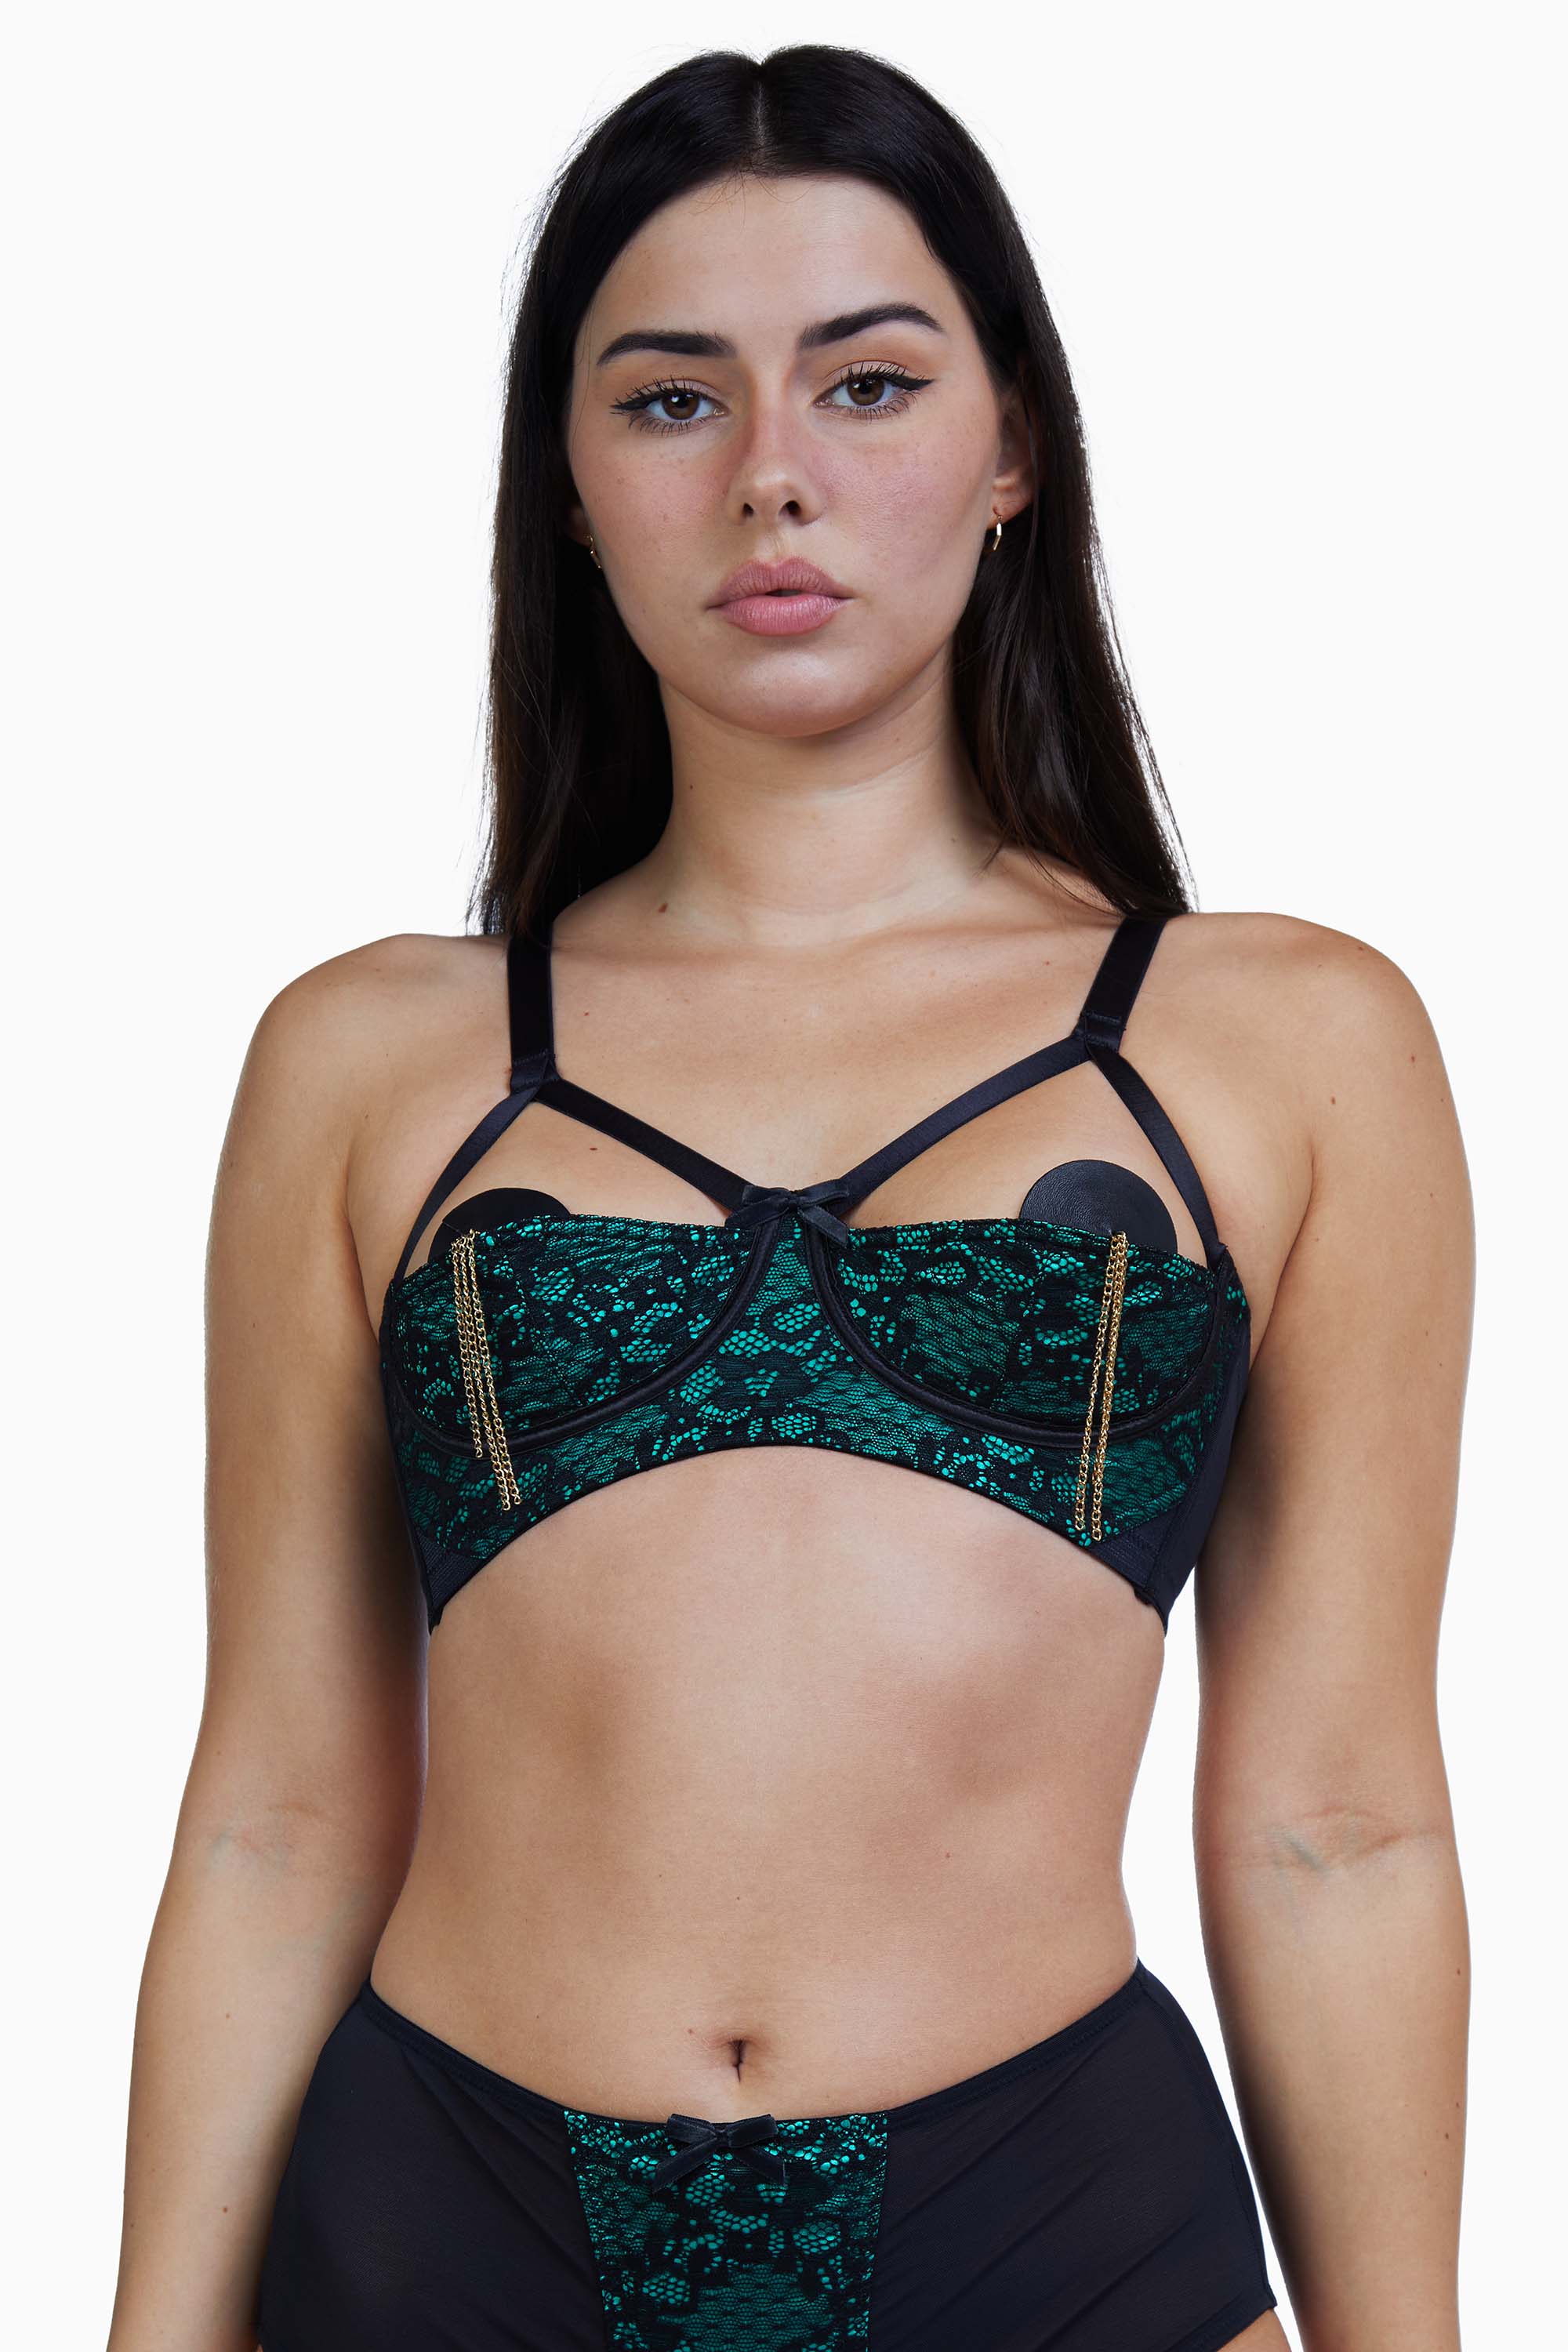 BE CHICK - Emerald Teal lace bra Love BeChick ❤ - BeChick - Lace